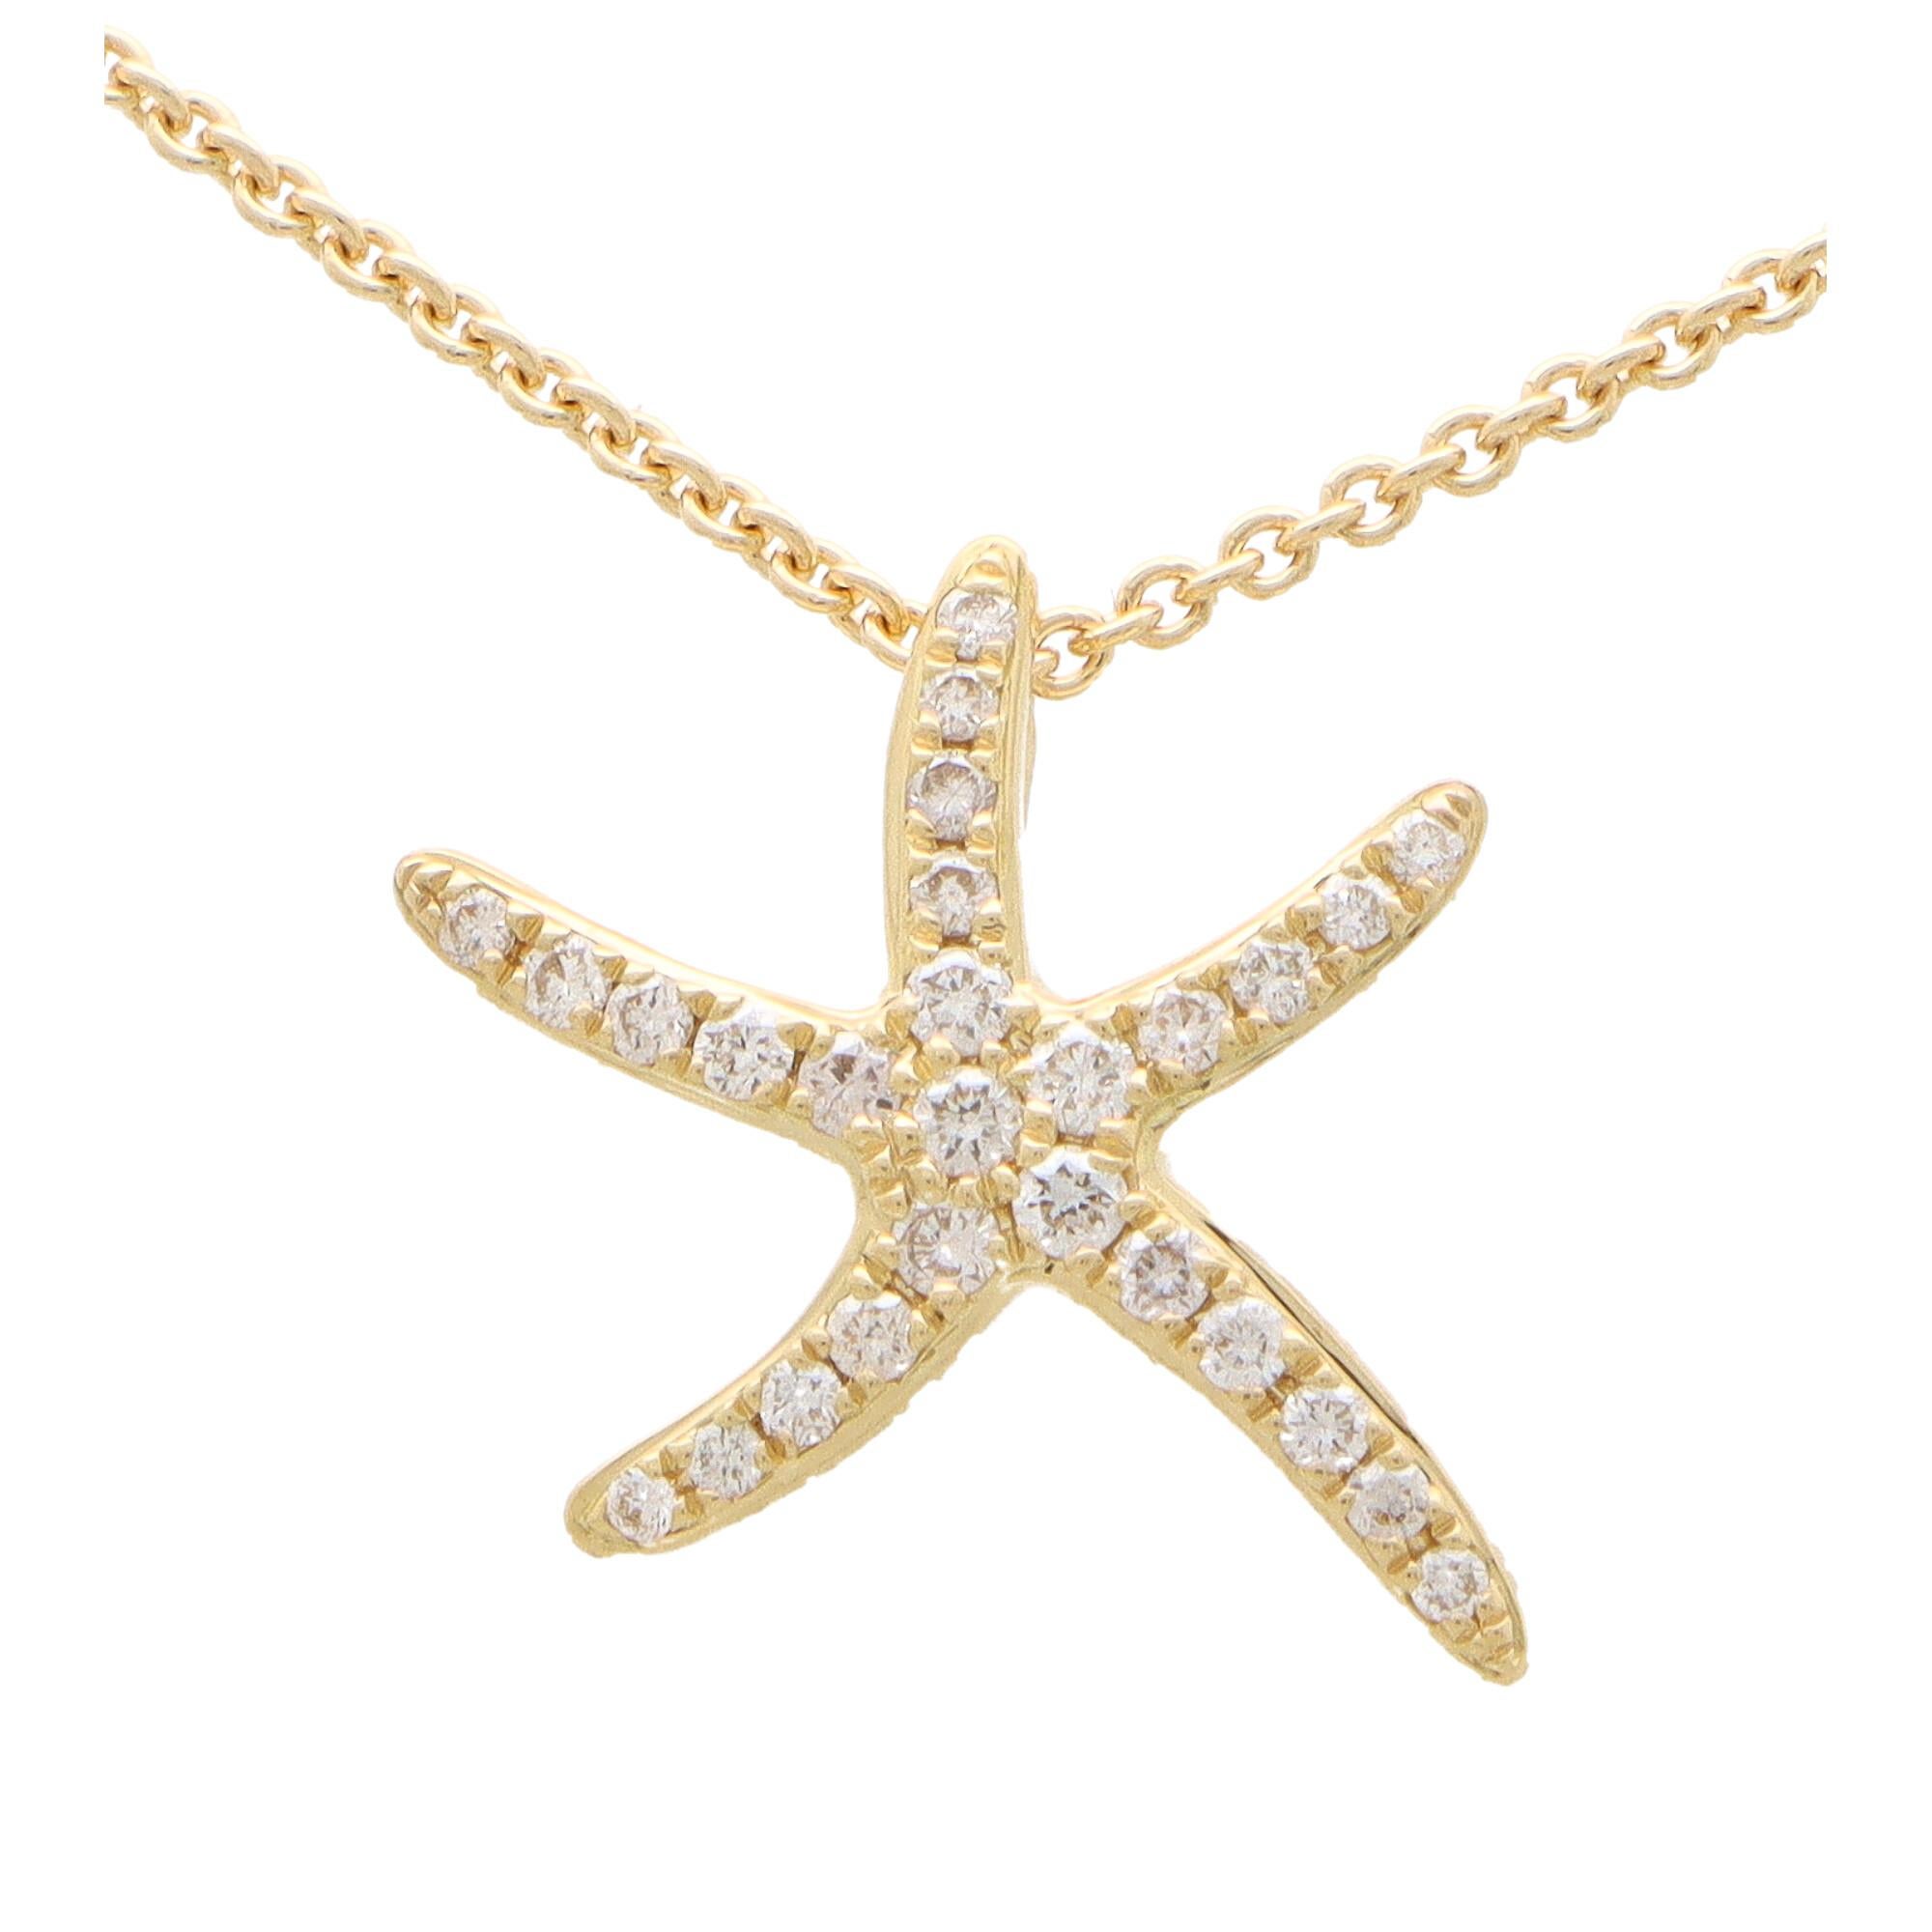 A lovely modern diamond set starfish pendant set in 18k yellow gold.

The pendant is pave set throughout with 27 round brilliant cut diamonds within a starfish motif. Due to the design and size this pendant would make a perfect necklace to wear